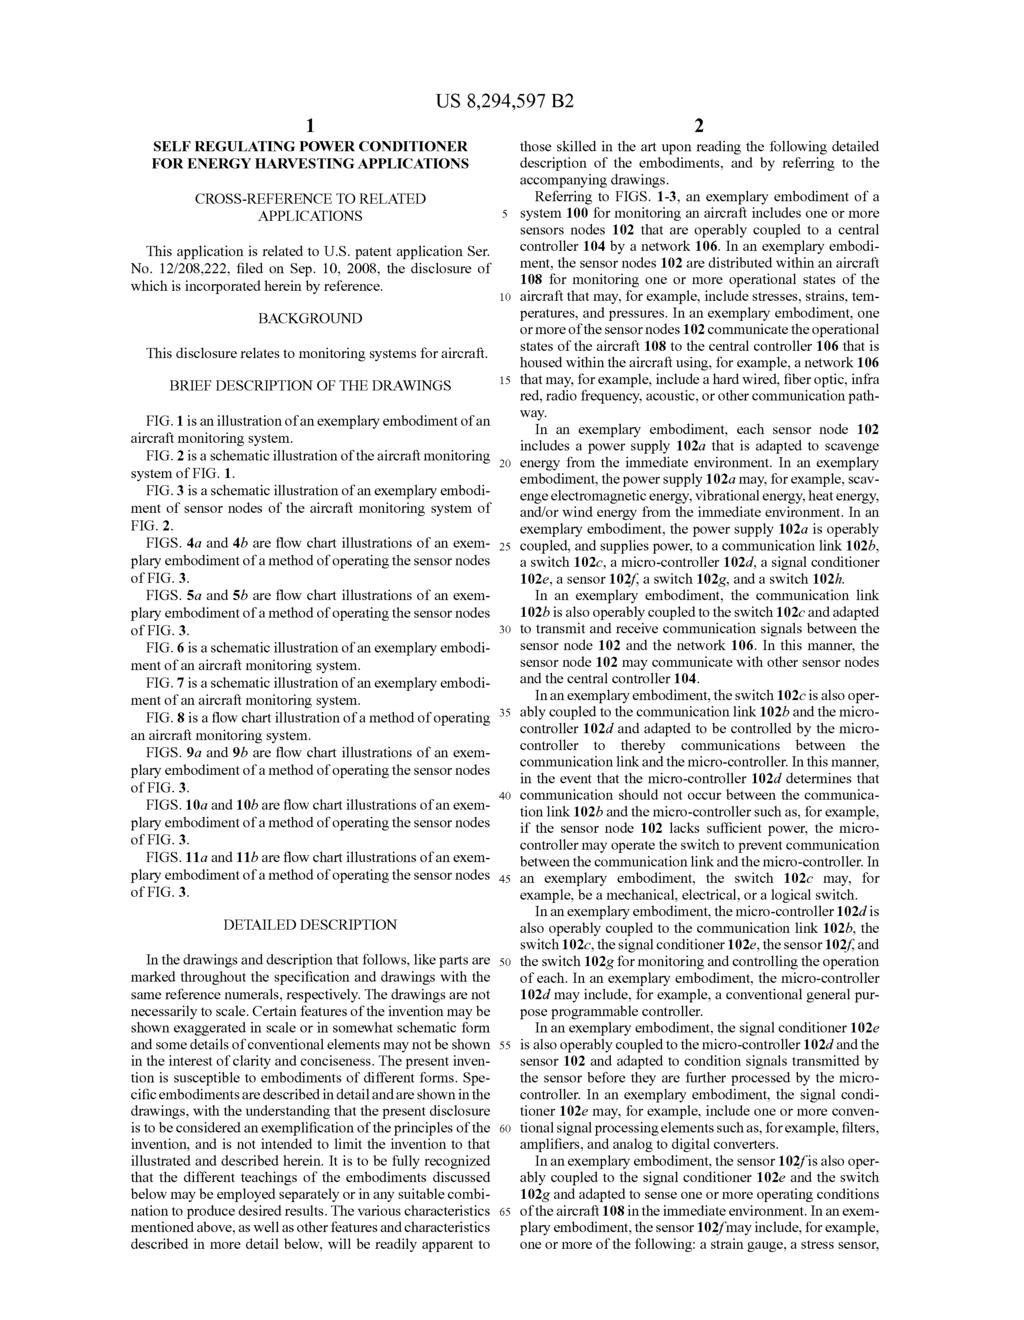 1. SELF REGULATING POWER CONDITIONER FOR ENERGY HARVESTING APPLICATIONS CROSS-REFERENCE TO RELATED APPLICATIONS This application is related to U.S. patent application Ser. No. 12/208.